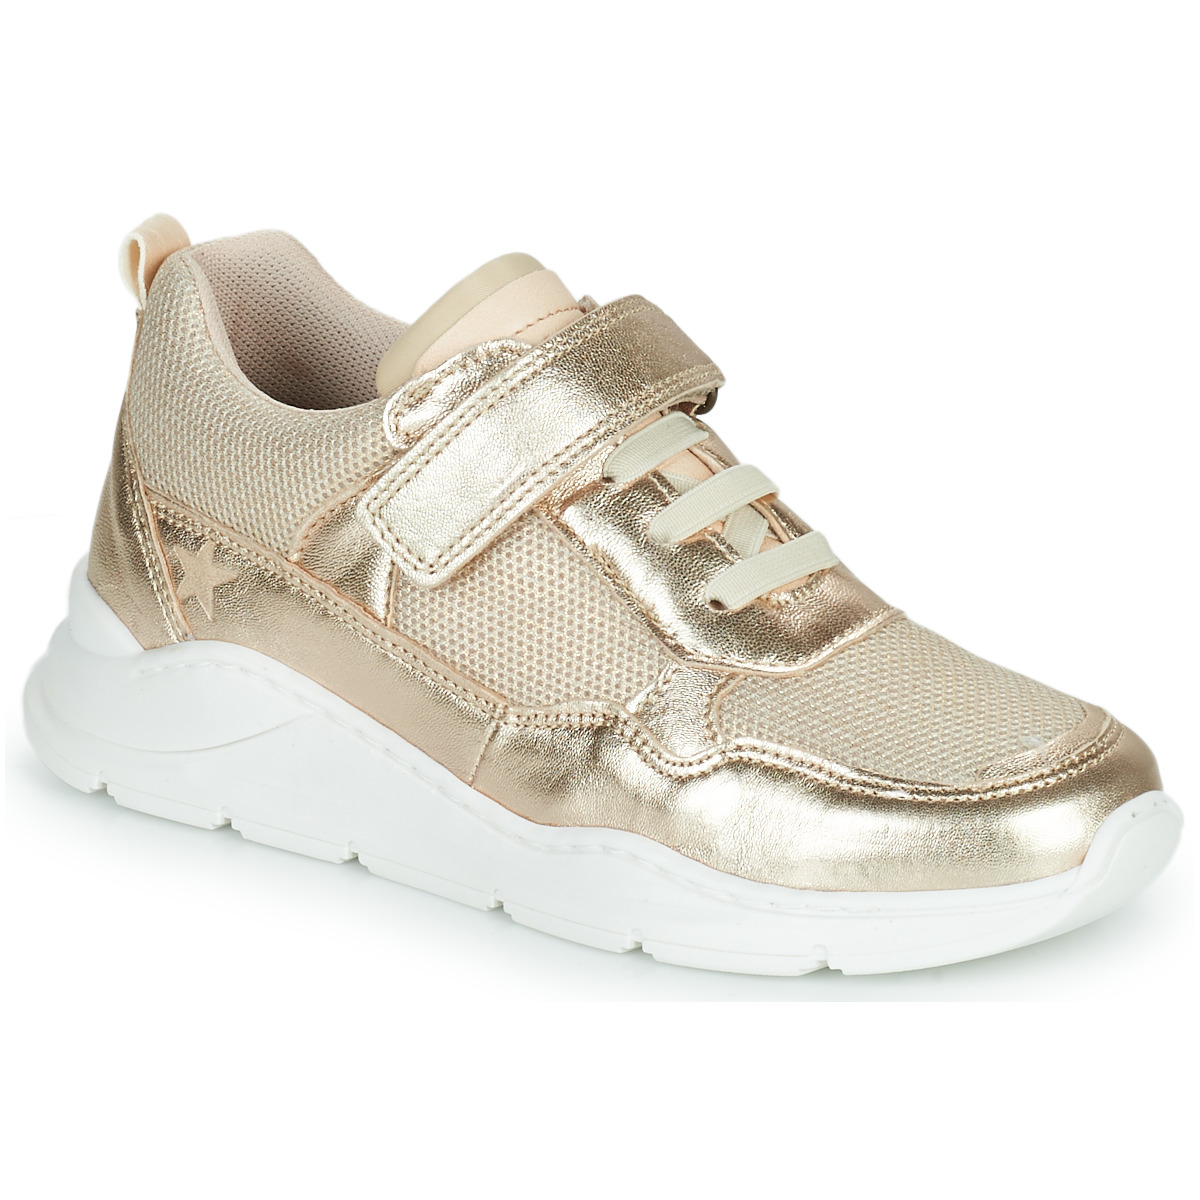 Shoes Girl Low top trainers Bisgaard PAX Gold